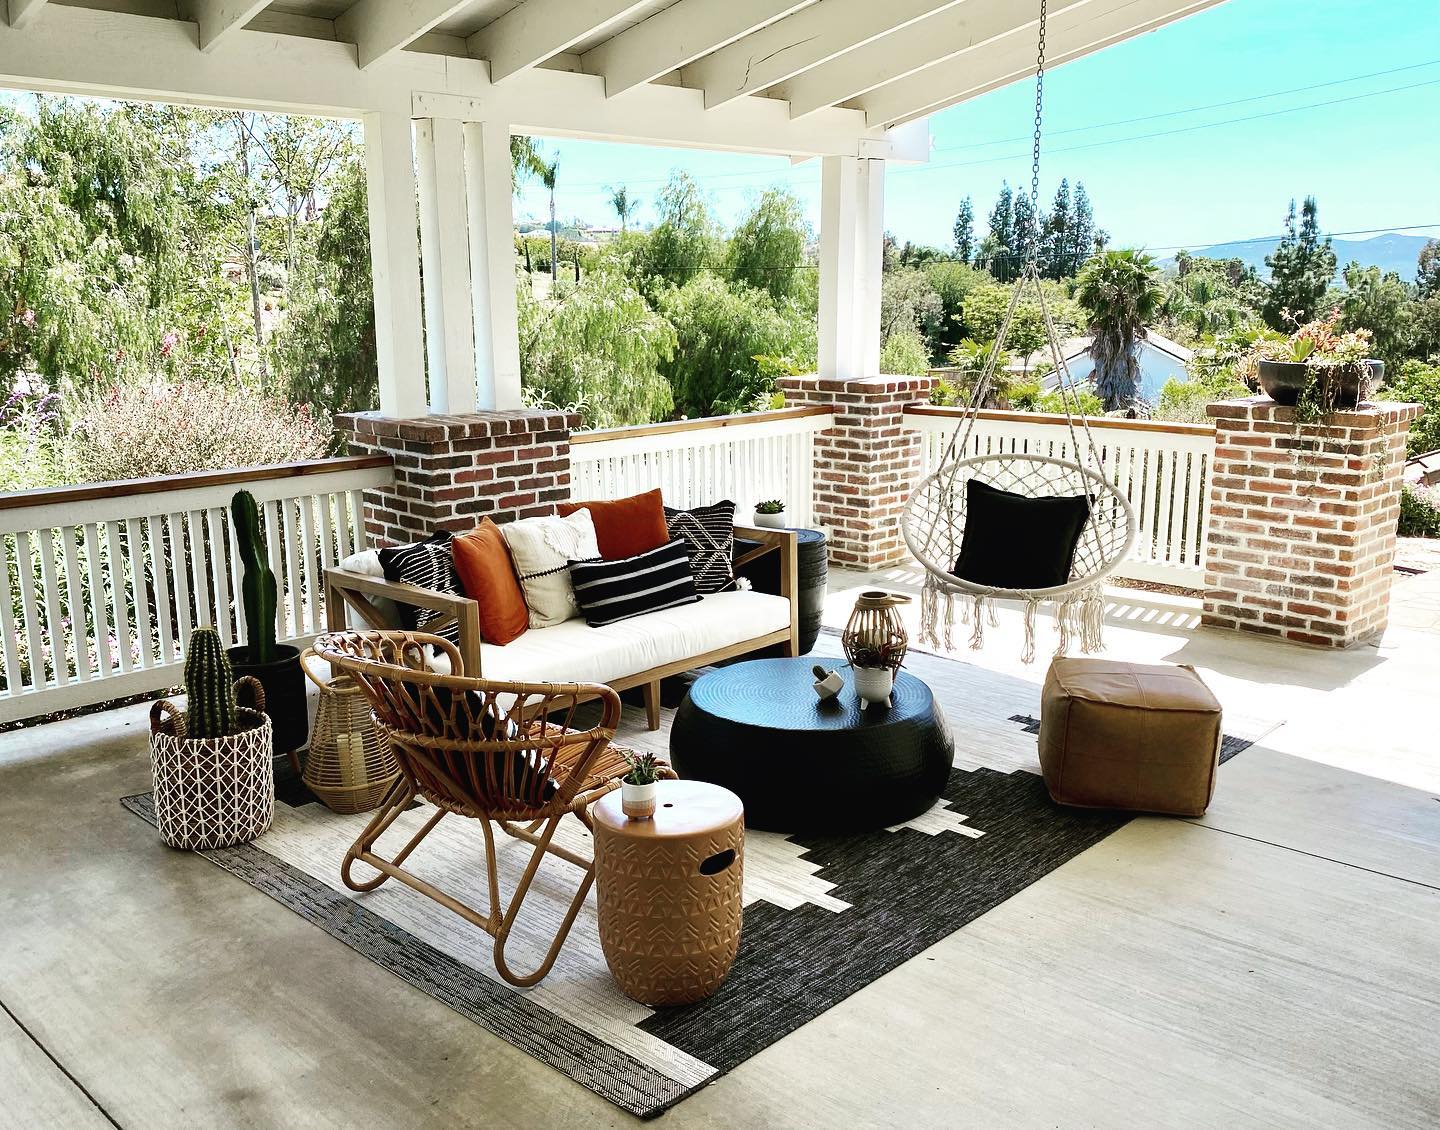 The Easy Way to Prep Your Outdoor Space for Summer